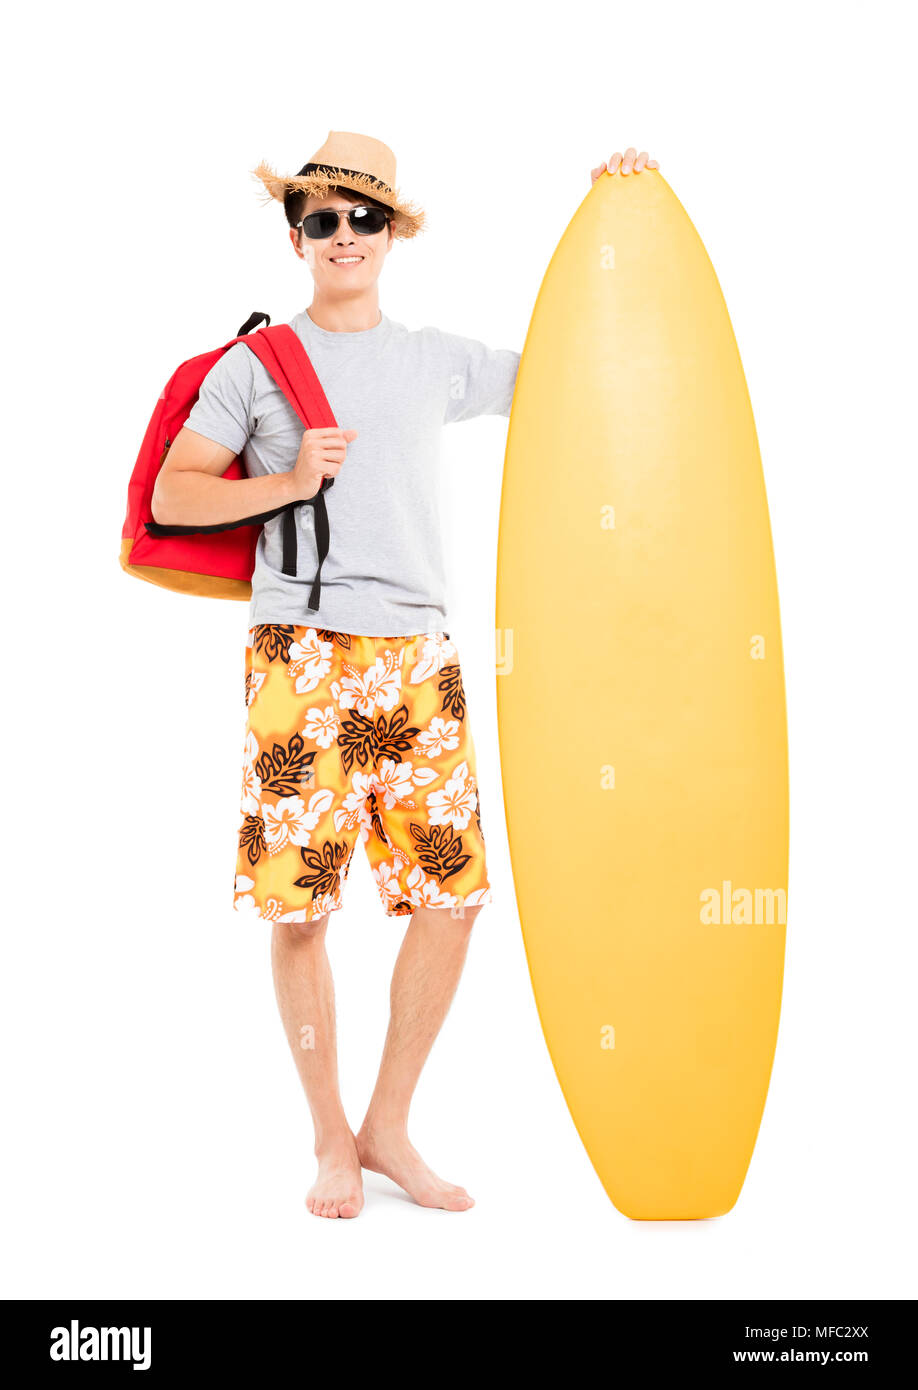 man holding surfboard and summer vacation concept Stock Photo